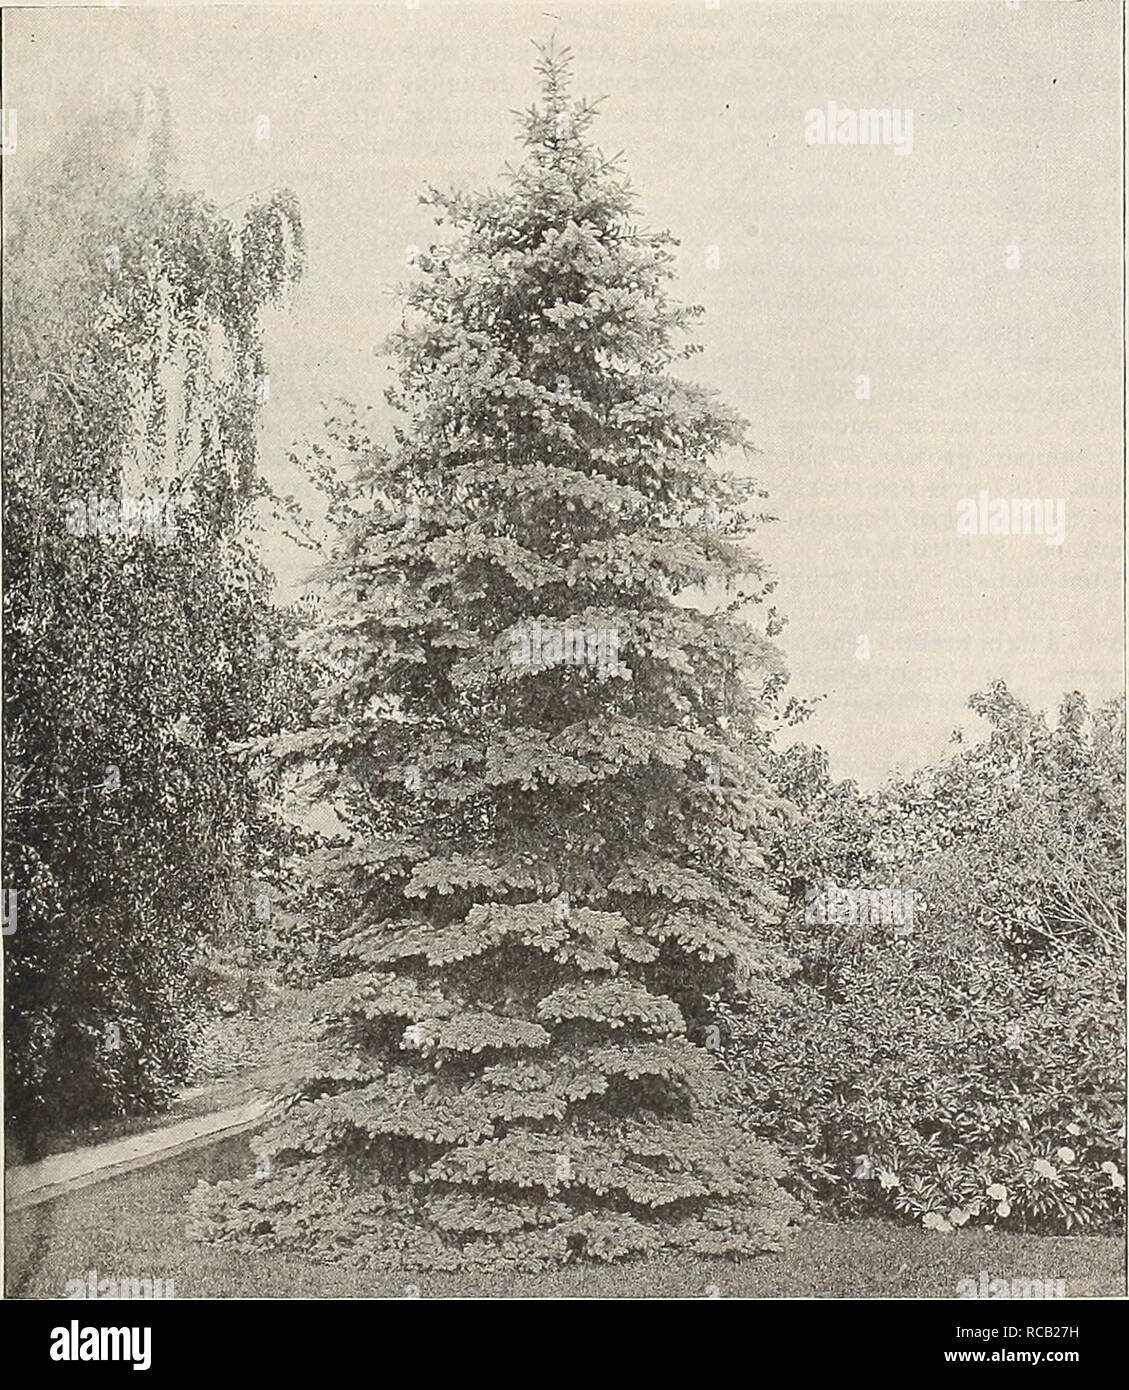 . [Ellwanger &amp; Barry's general catalogue]. GENERAL CATALOGUE 75 Twenty-five of the Most Desirable Species and Varieties for the Decoration of Parks, Gardens or Lawns, as follows, for $18.00: Maple, Norway Curled-leaved. &quot; Norway Schwedler's. &quot; Wler's Cut-leaved. &quot; Sug-ar. Almond, Large Doulile-flowermg-. Ash, Weeping. Aucuba-leaved. Birch, Cut-leaved Weeping. Beech, Cut-leaved. &quot; Purple-leaved. Crab, Double Rose-flowering. Elm, Huntingdon. &quot; superba. Horse Chestnut, Double White-flowering, 'â Red-flowering. Linden, European, â¢ Red Fern-leaved. Magnolia, speciosa.  Stock Photo